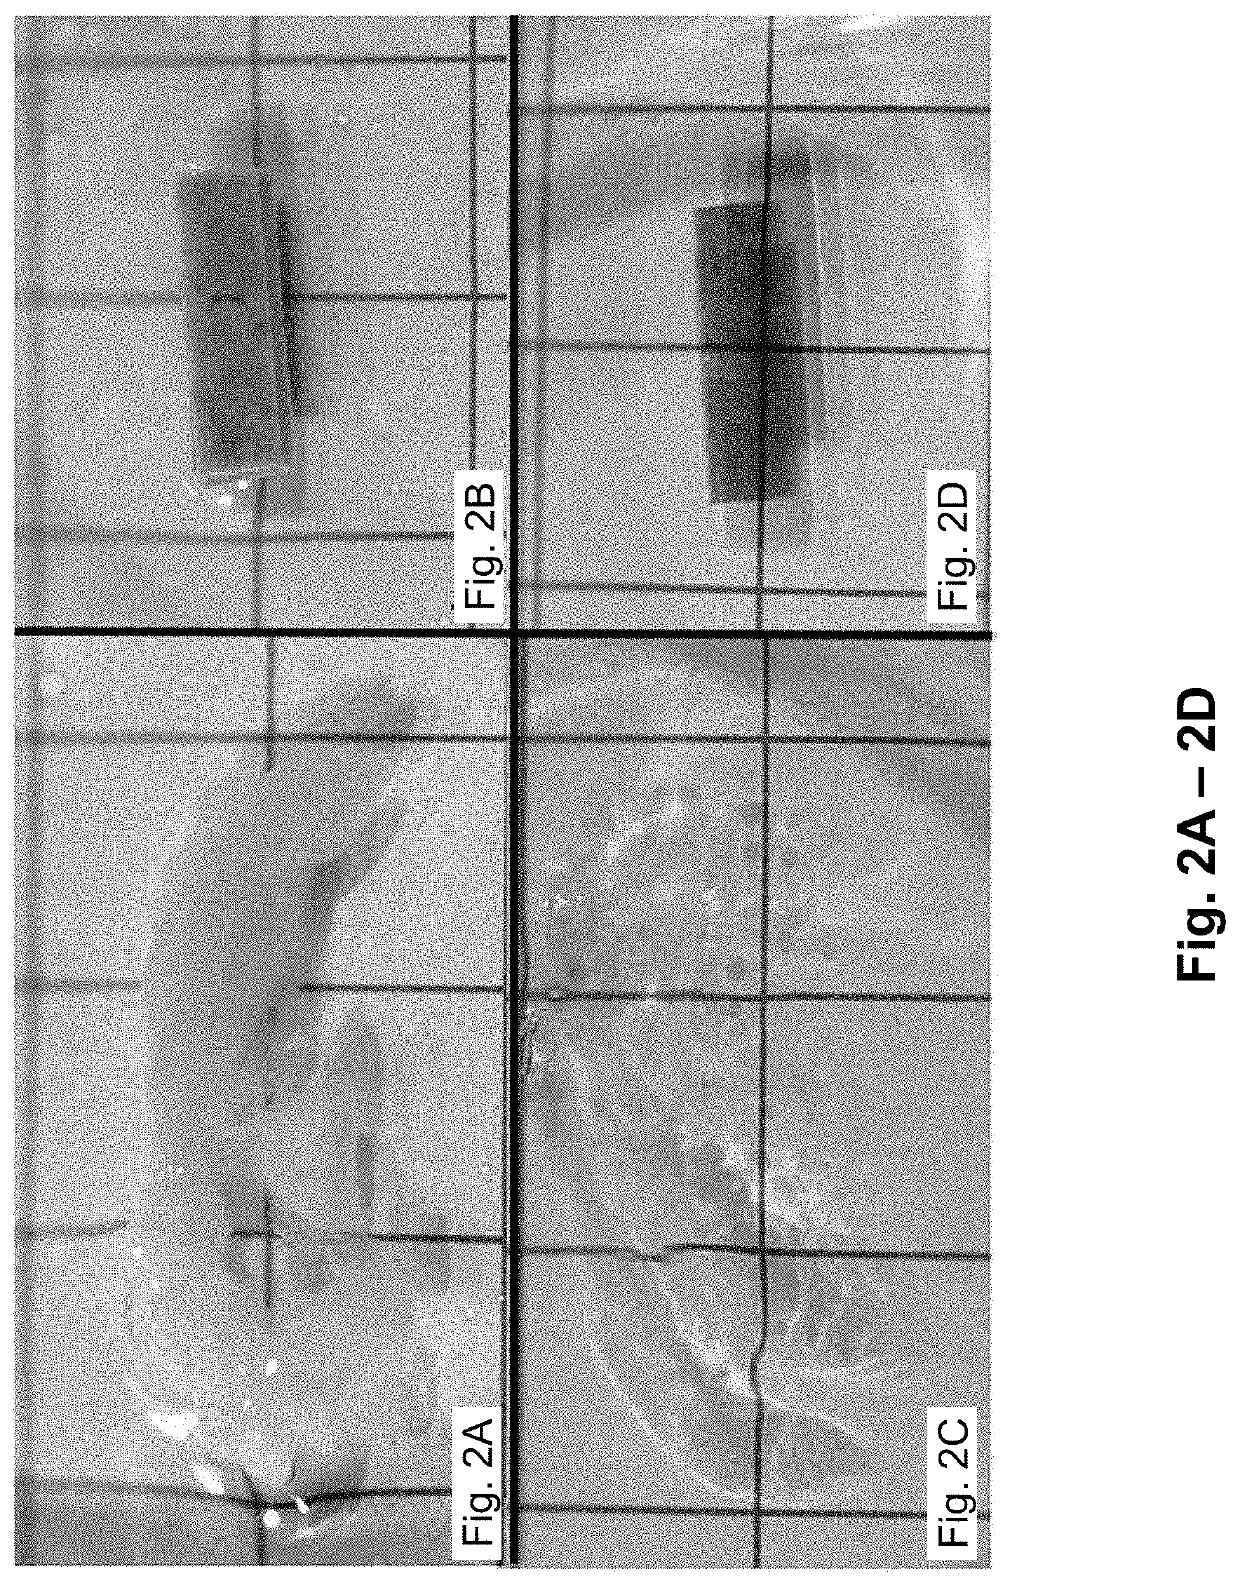 Simultaneous dehydration and staining of tissue for deep imaging